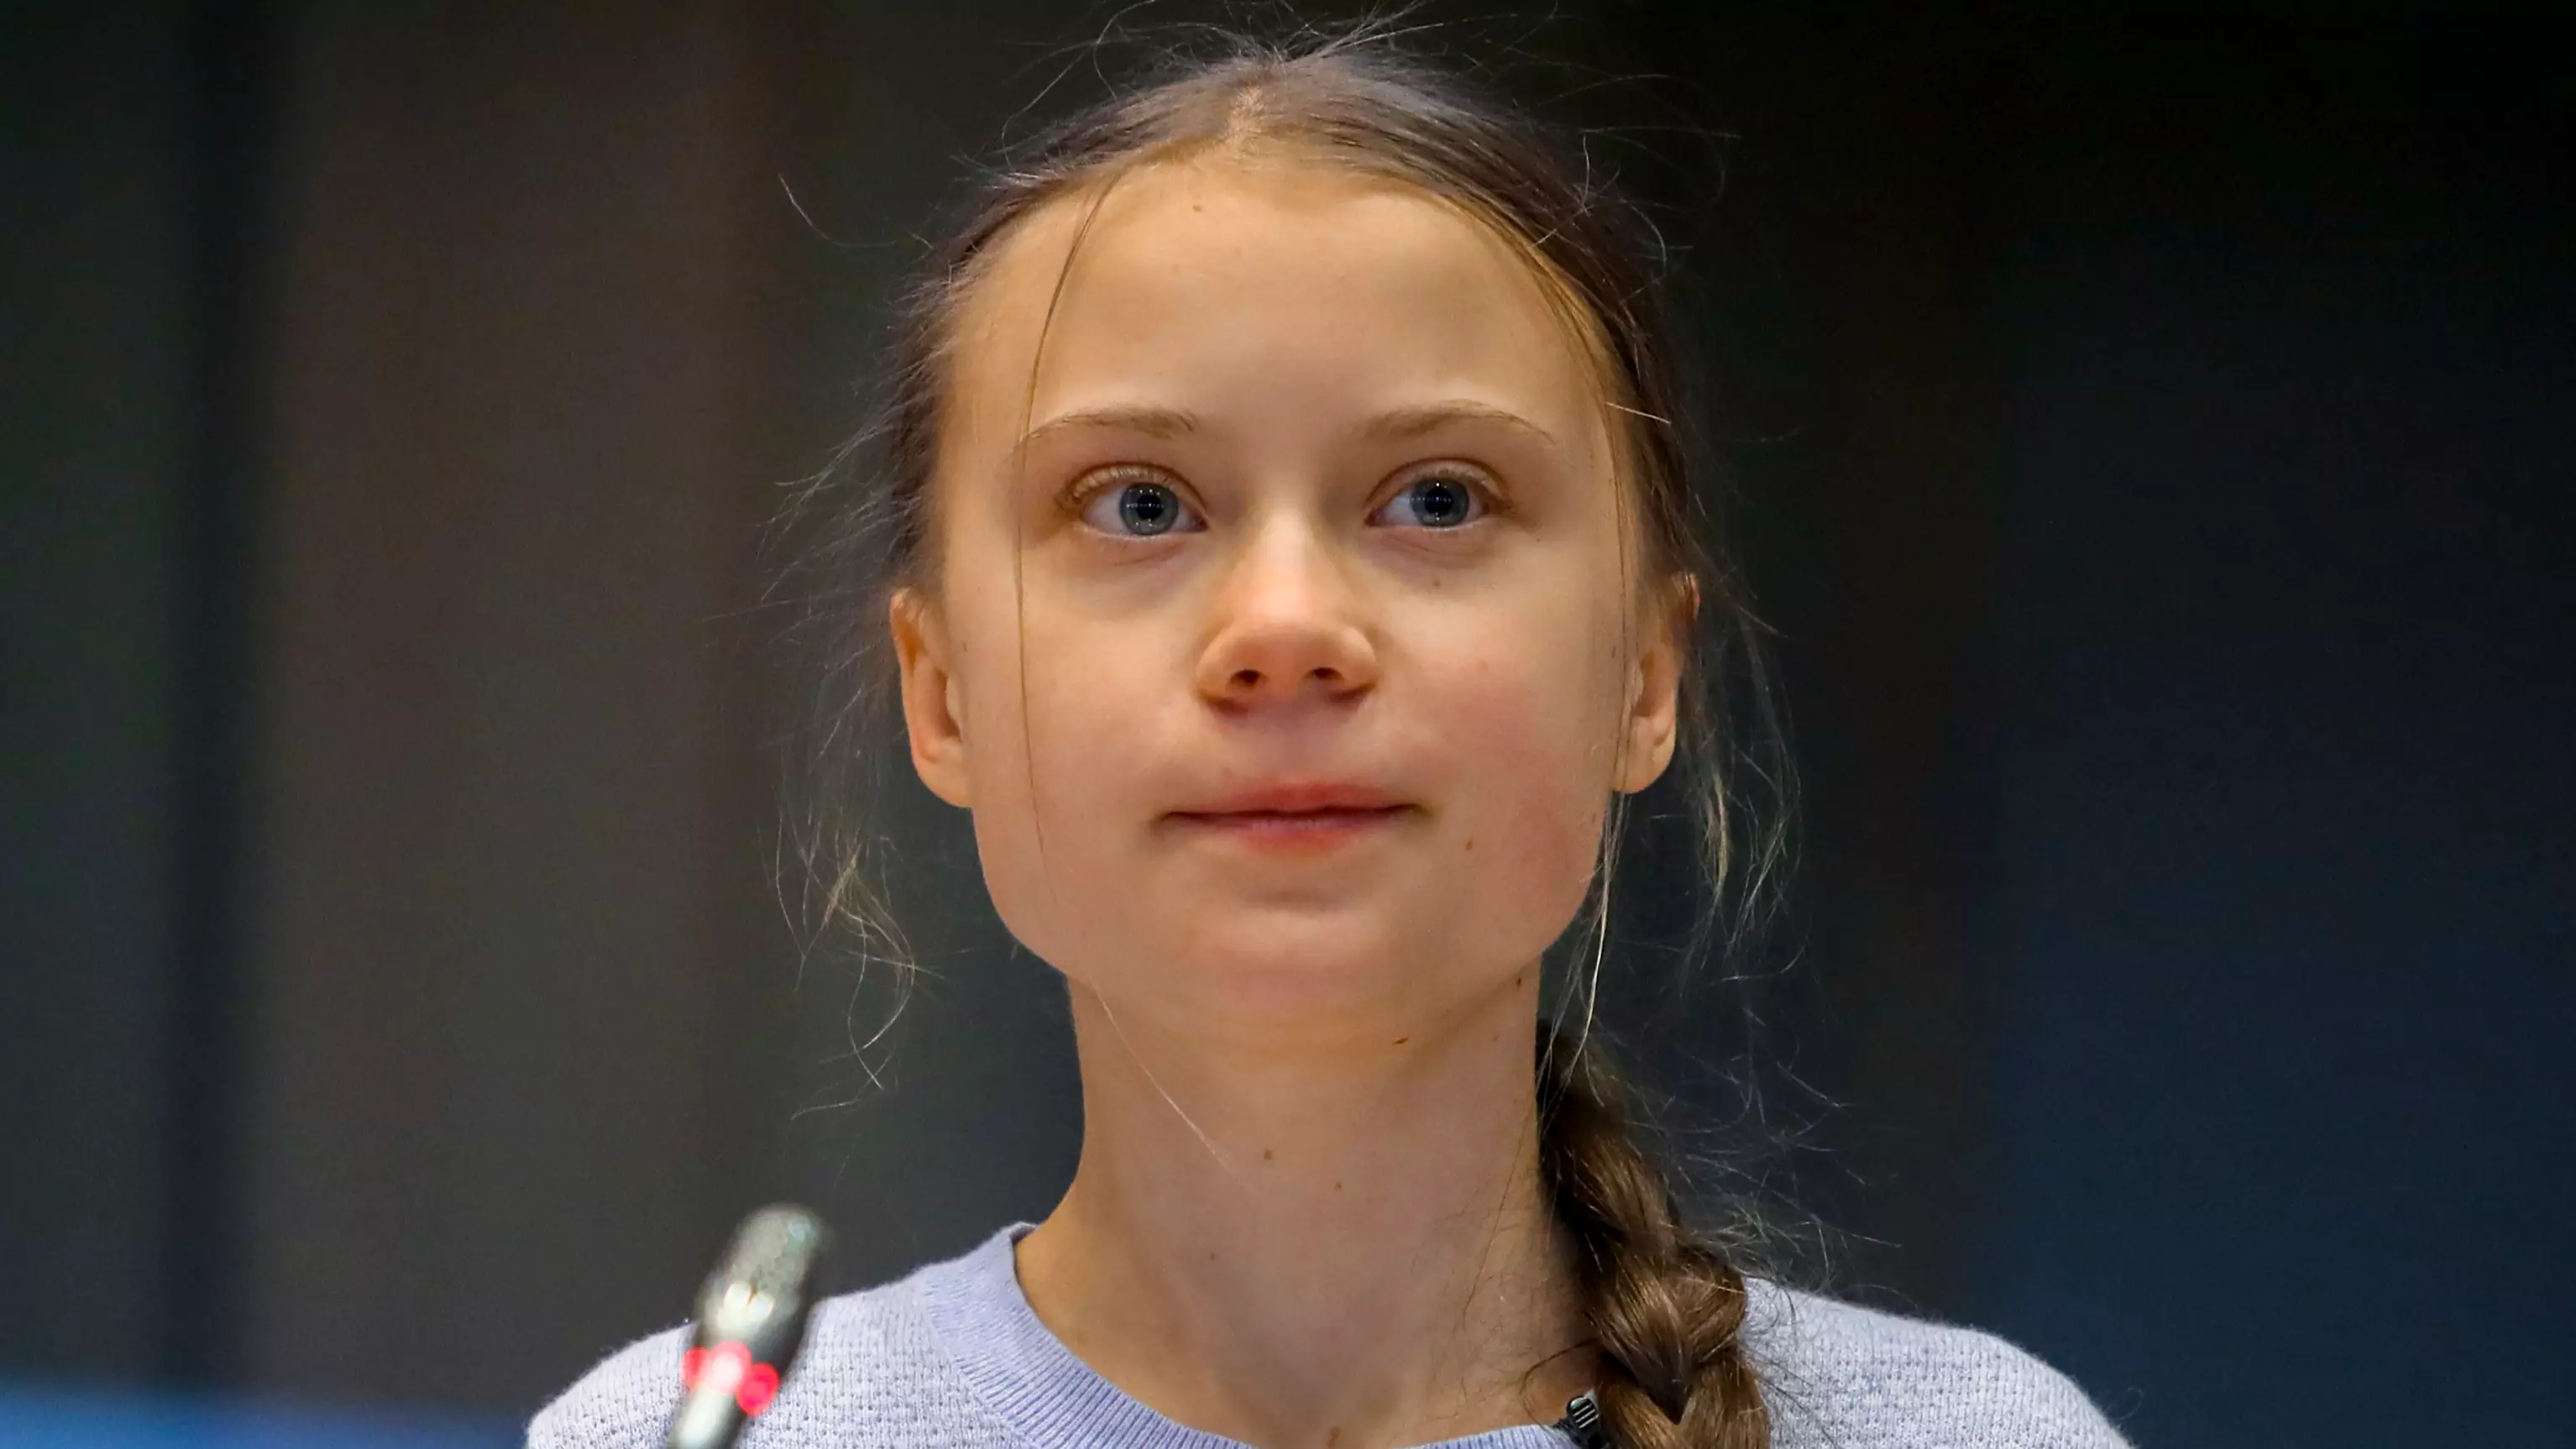 Controversy Sparks After Greta Thunberg Included On Panel About Coronavirus